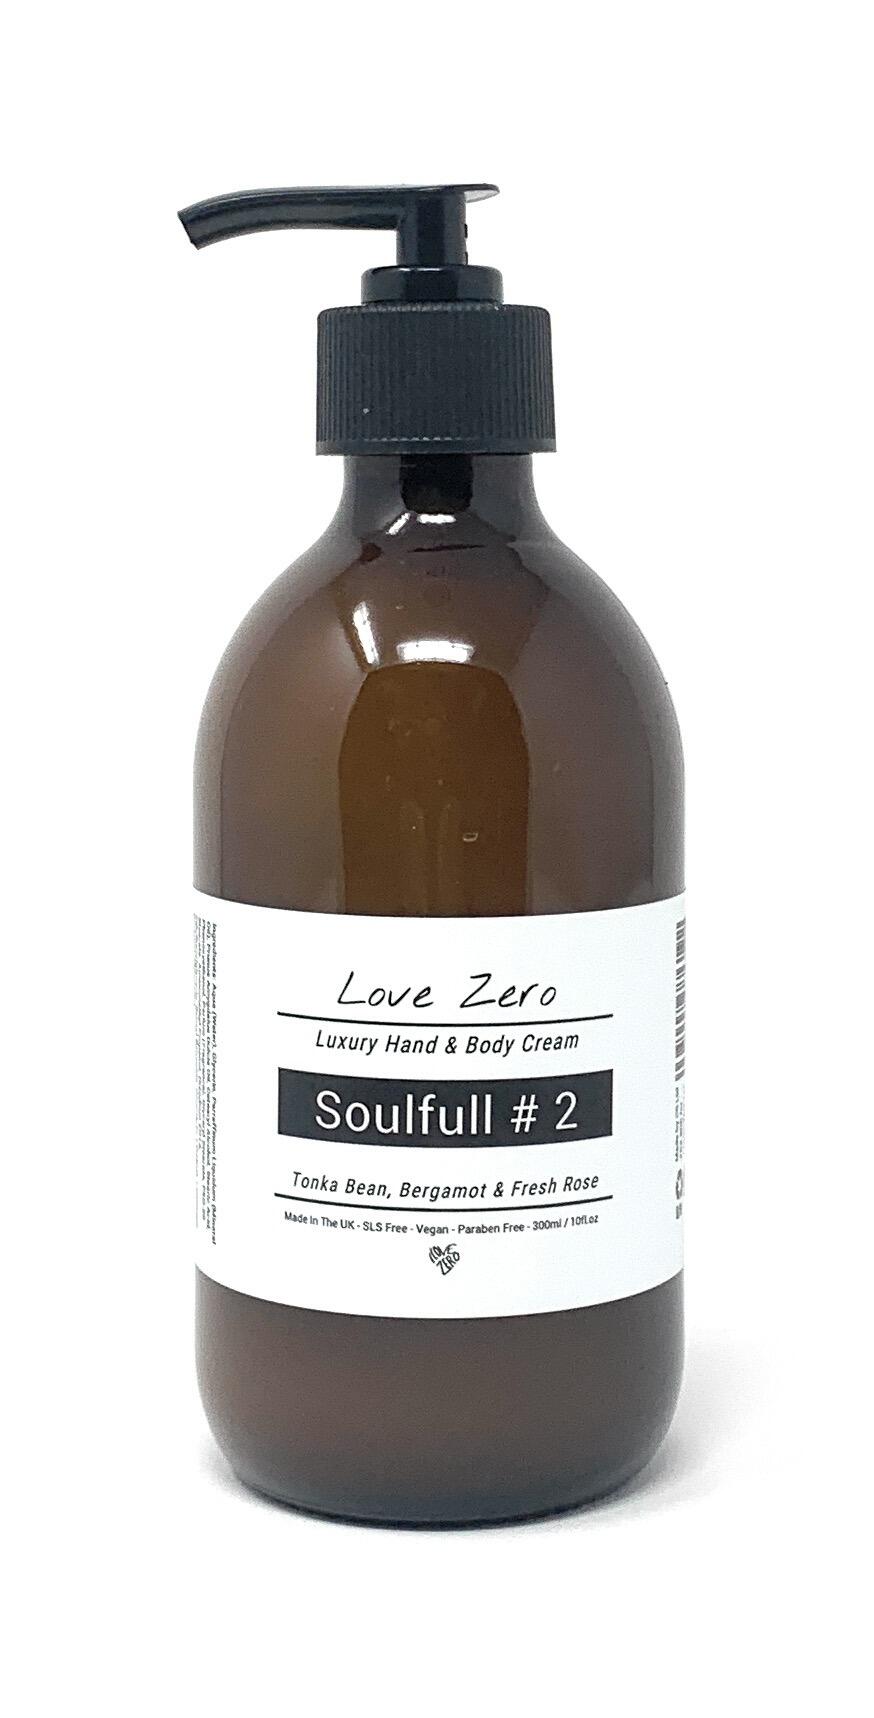 Soulfull Number 2 Hand and Body Cream